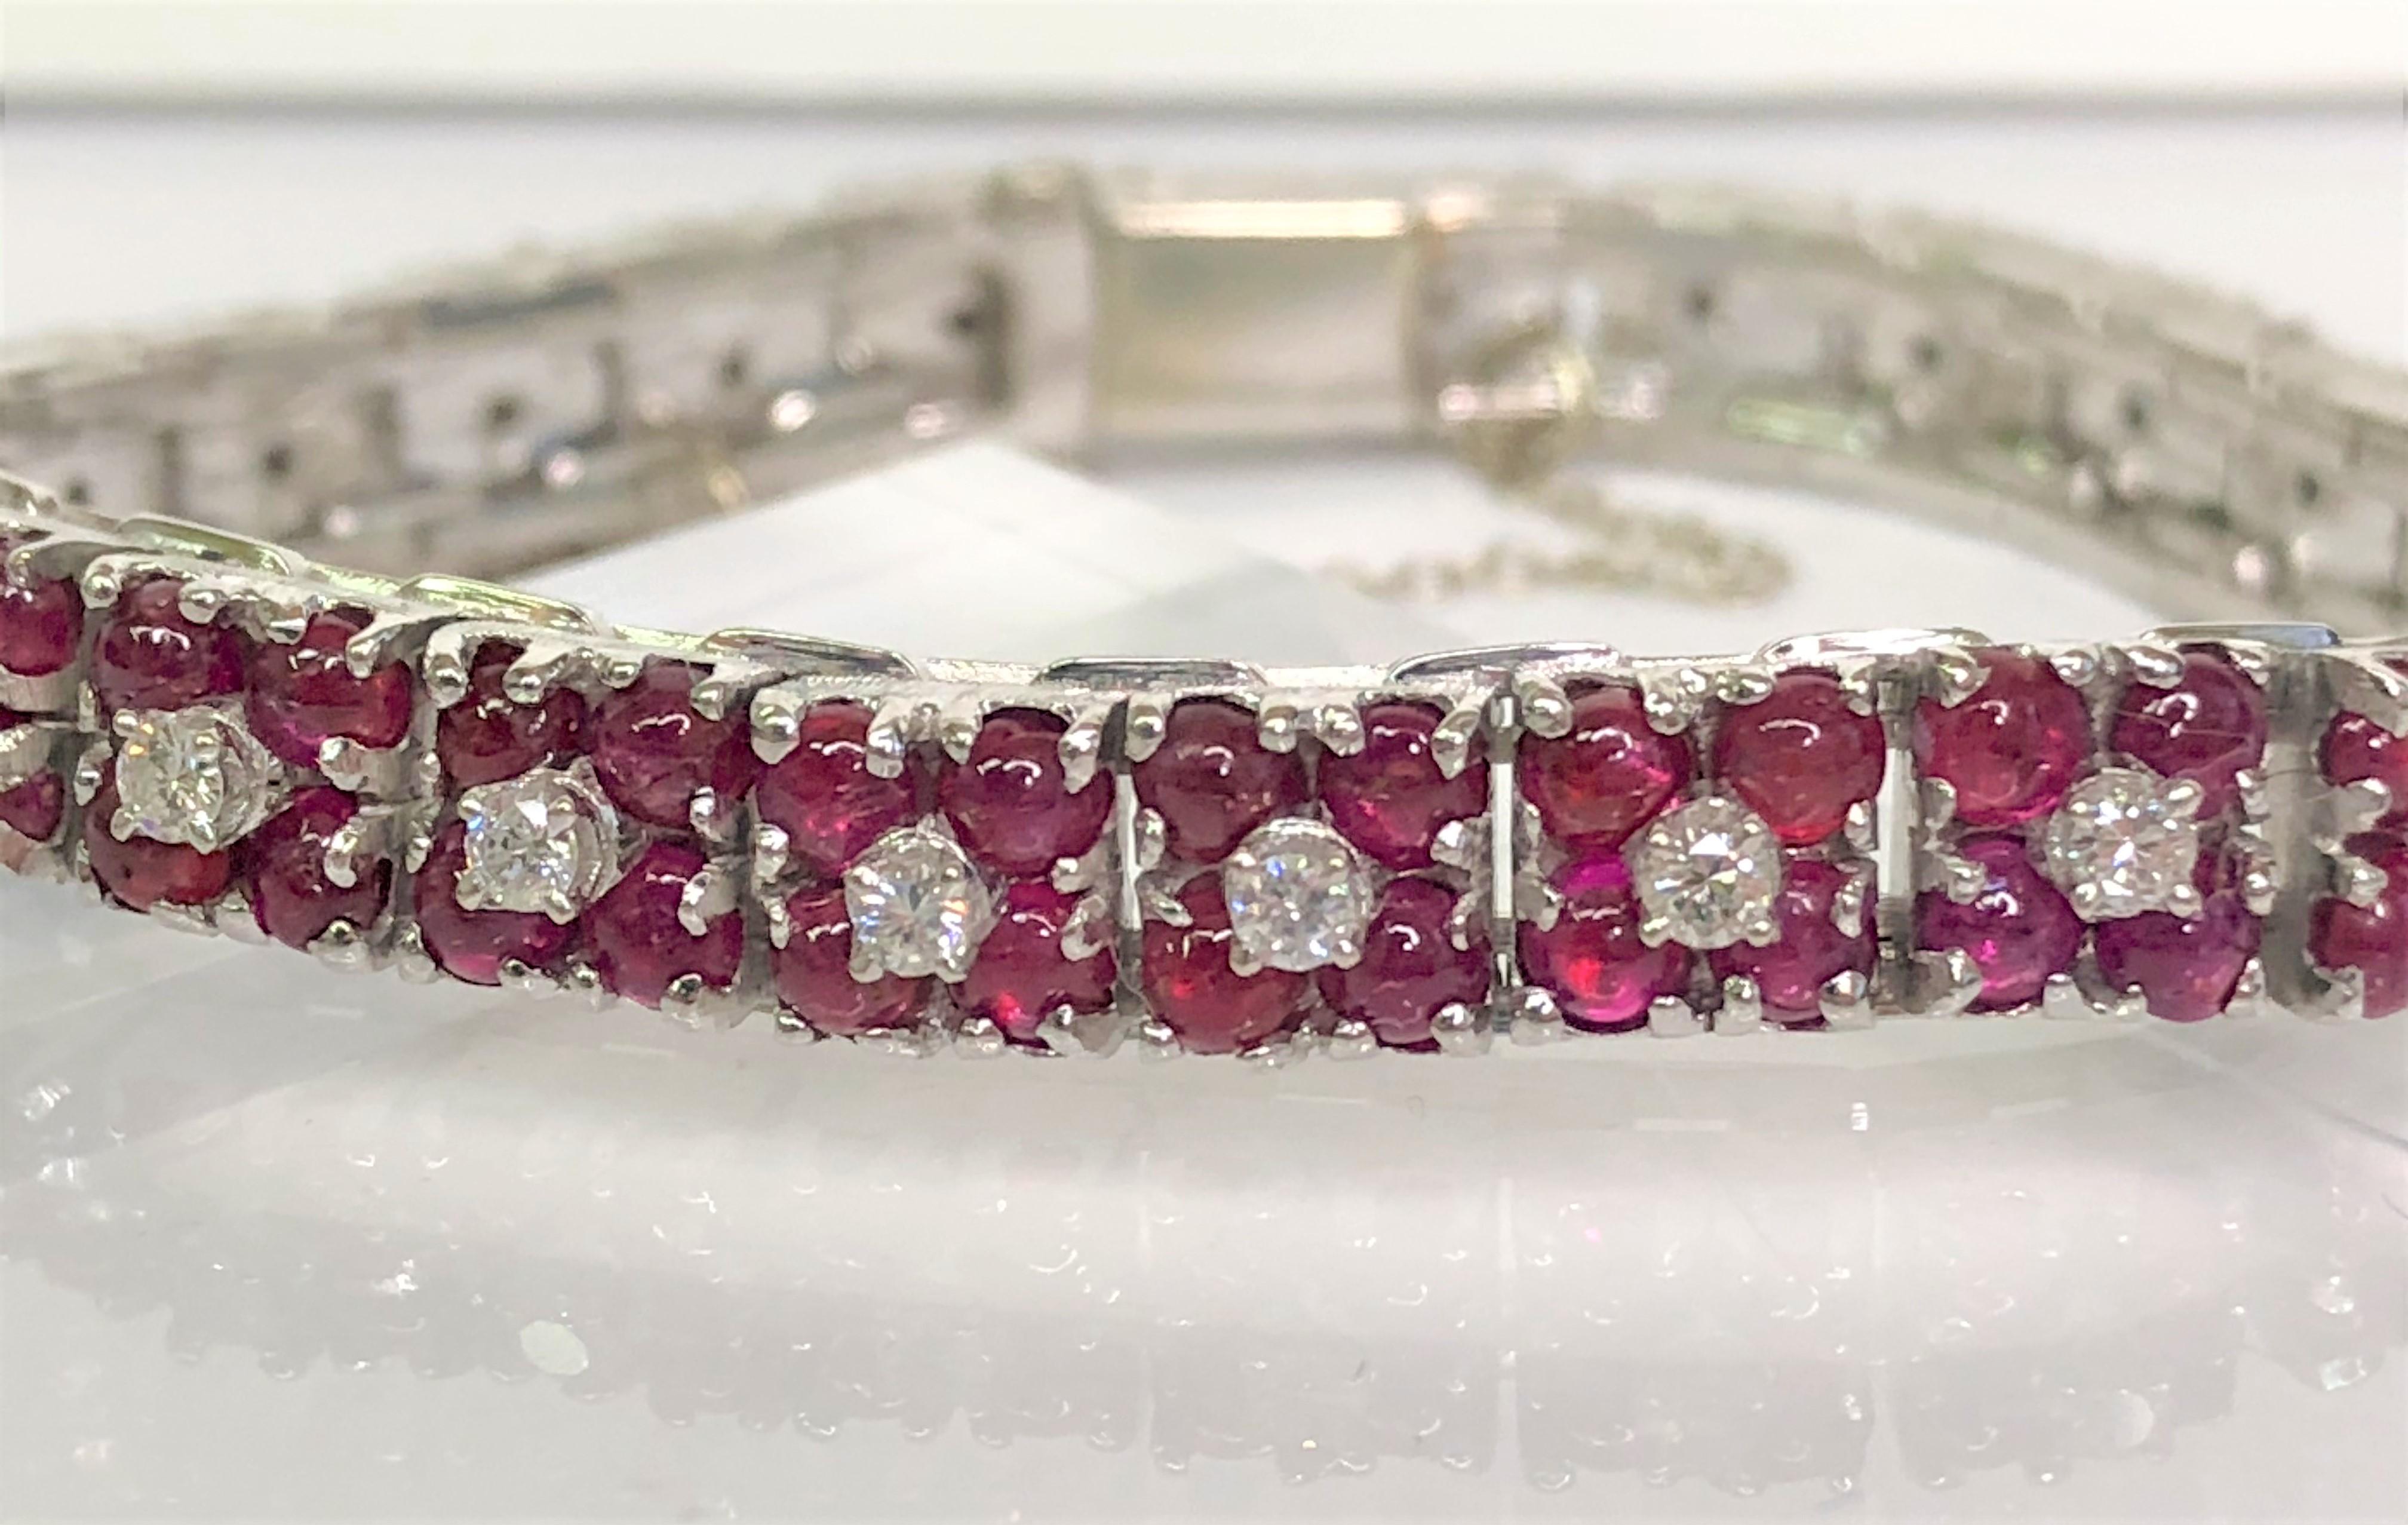 This one-of-a-kind bracelet is sure to be anyone's favorite!
27 sections, each containing one diamond surrounded by 4 cabochon rubies.  
108 rubies, each approximately 3mm round.
27 round prong set diamonds, approximately 1.9 total diamond